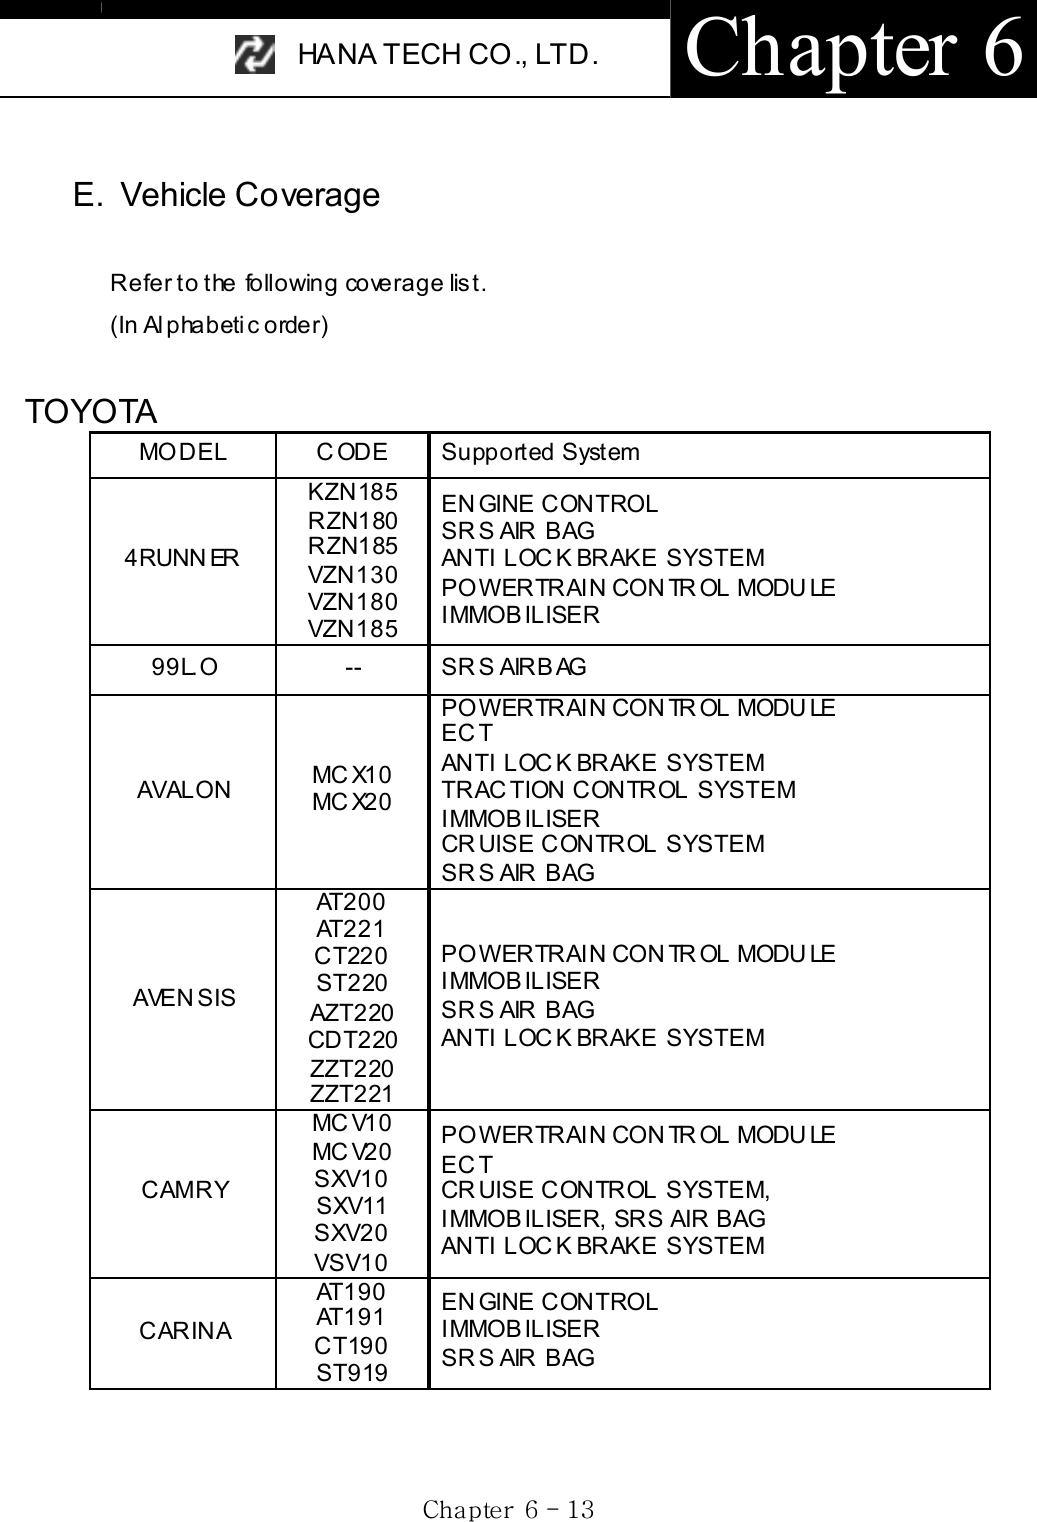 HANA TECH CO., LTD.  Chapter 6 Gj G]G TGXZGE. Vehicle Coverage Refer to the following coverage list.   (In Alphabetic order) TOYOTA MODEL CODE Supported System 4RUNN ER  KZN185 RZN180 RZN185 VZN130 VZN180 VZN185 ENGINE CONTROL SR S AIR  BAG ANTI LOC K BRAKE SYSTEM POWERTRAIN CONTROL MODULE I MMOB ILISER  99L.O -- SRS AIRBAG AVALON  MCX10 MCX20 POWERTRAIN CONTROL MODULE EC T ANTI LOC K BRAKE SYSTEM TRACTION CONTROL SYSTEM I MMOB ILISER  CR UISE CONTROL SYSTEM SR S AIR  BAG AVEN SIS AT200 AT221 CT220 ST220 AZT220 CDT220 ZZT220 ZZT221 POWERTRAIN CONTROL MODULE I MMOB ILISER  SR S AIR  BAG ANTI LOC K BRAKE SYSTEM CAMRY MCV10 MCV20 SXV10 SXV11  SXV20 VSV10 POWERTRAIN CONTROL MODULE EC T CR UISE CONTROL SYSTEM, I MMOB IL ISER,  SR S  AIR BAG ANTI LOC K BRAKE SYSTEM CARINA AT190 AT191 CT190 ST919 ENGINE CONTROL I MMOB ILISER  SR S AIR  BAG 